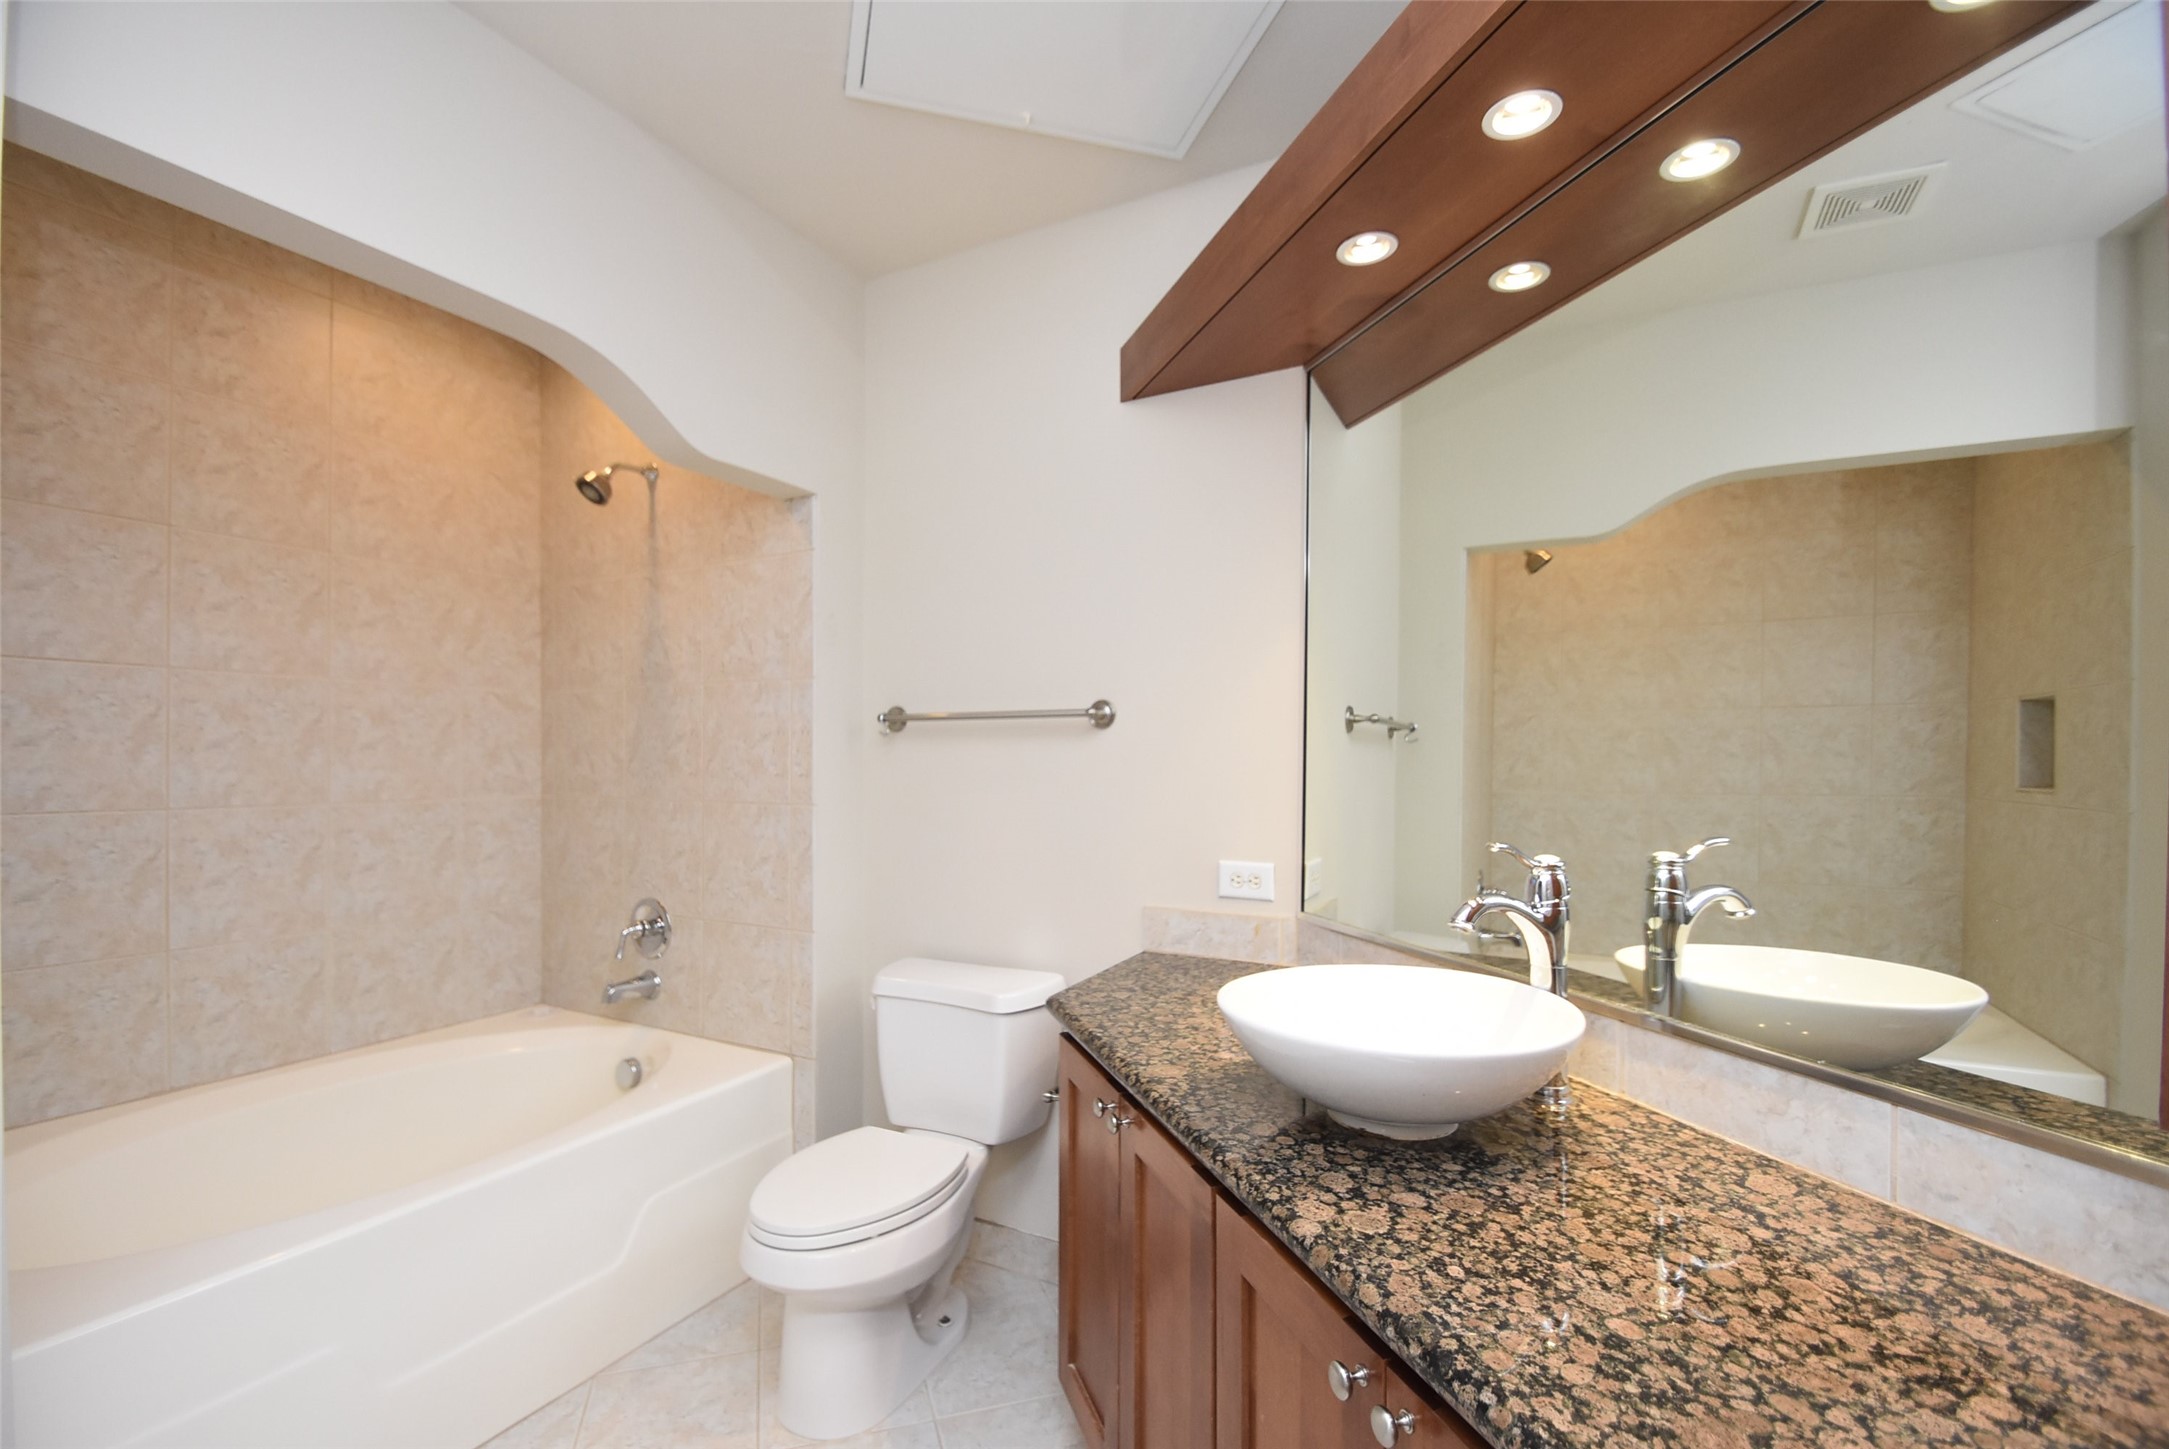 The master bath has a large tub with a shower.